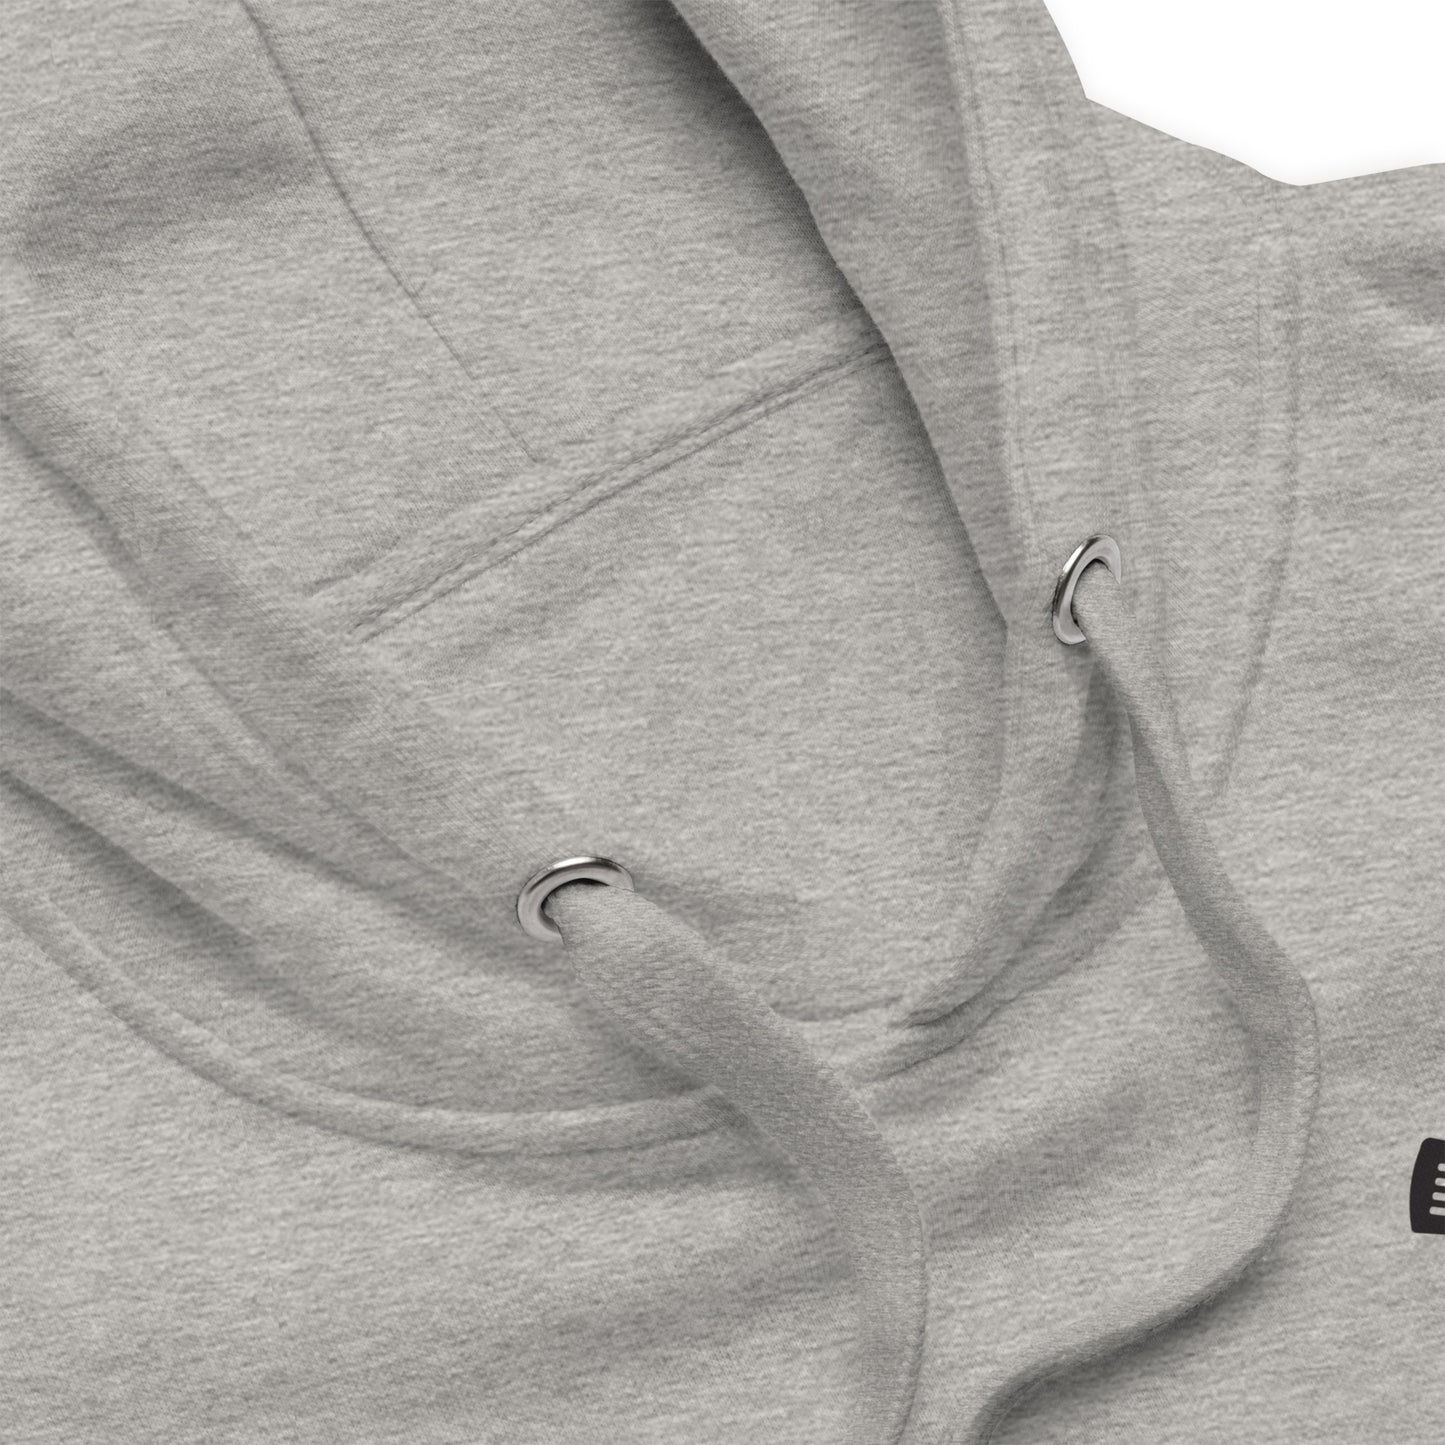 Barbecue Co | Hoodie